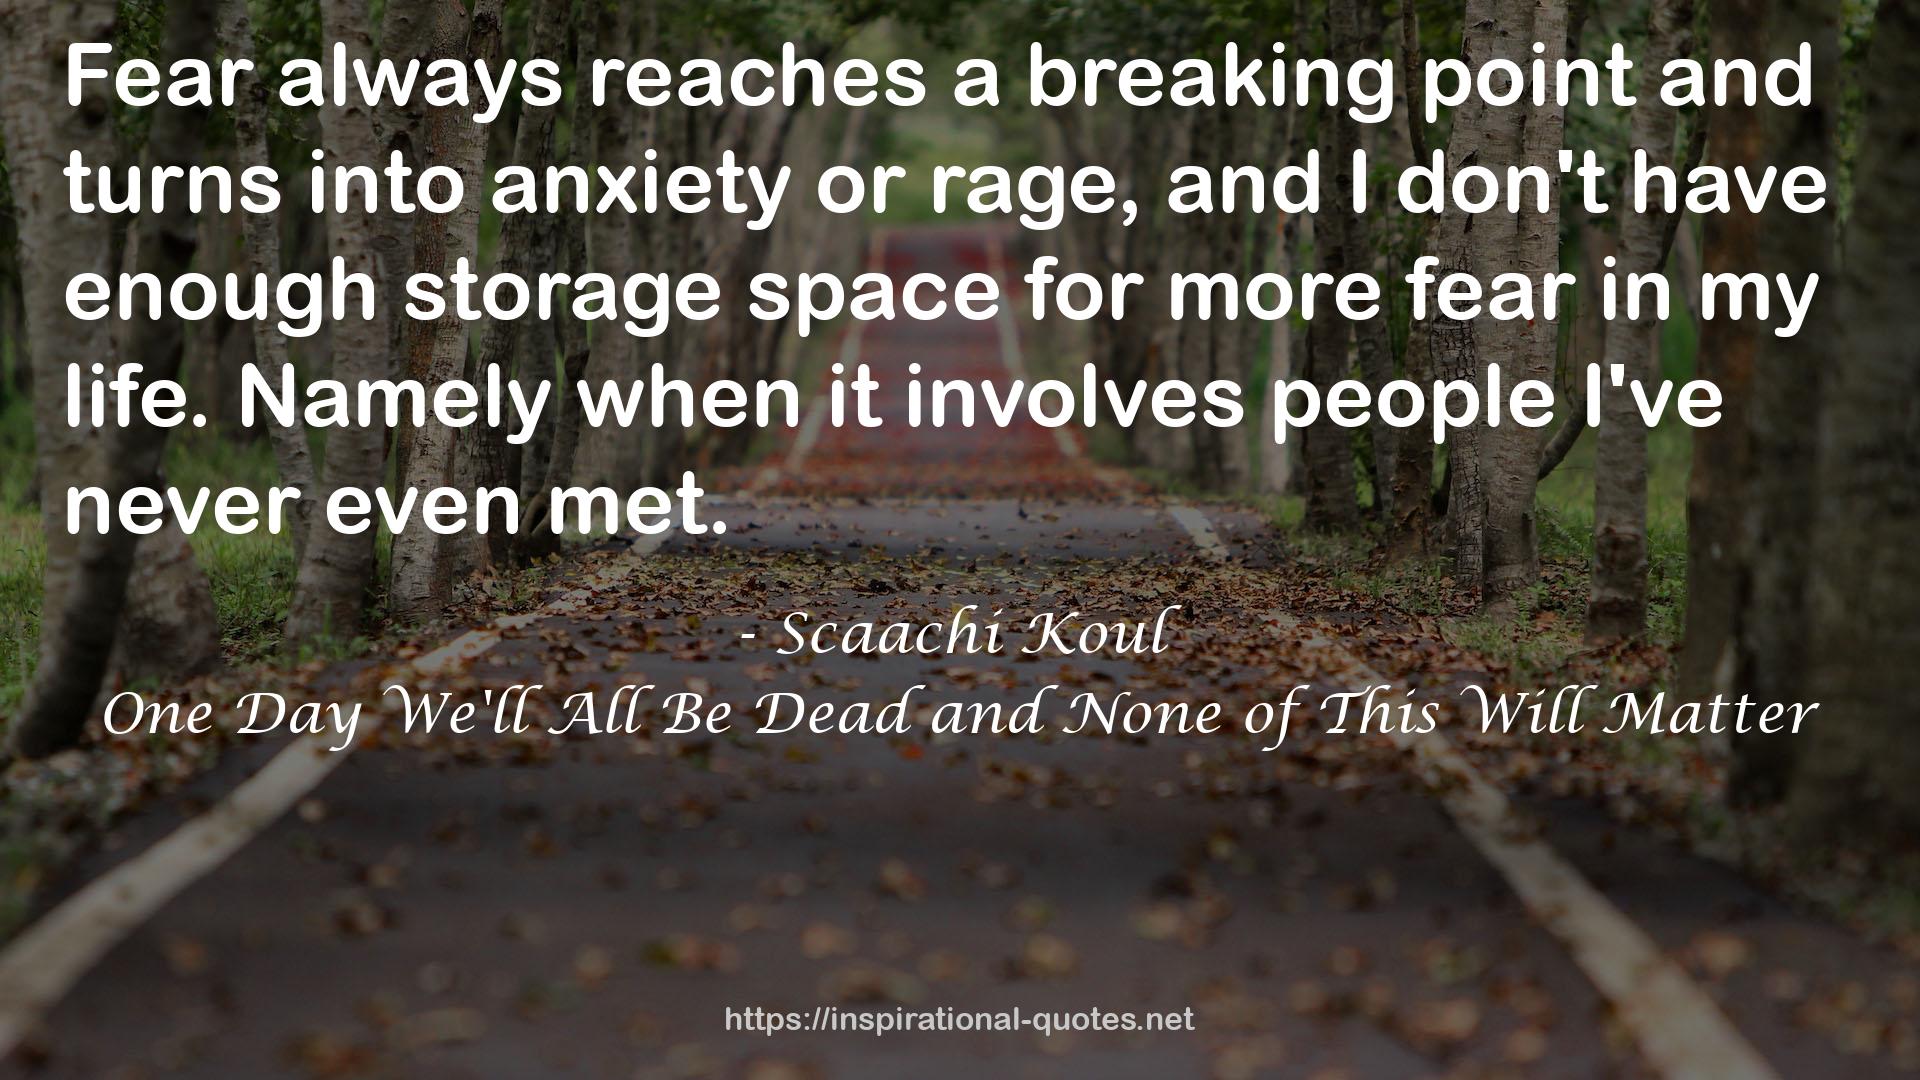 a breaking point  QUOTES